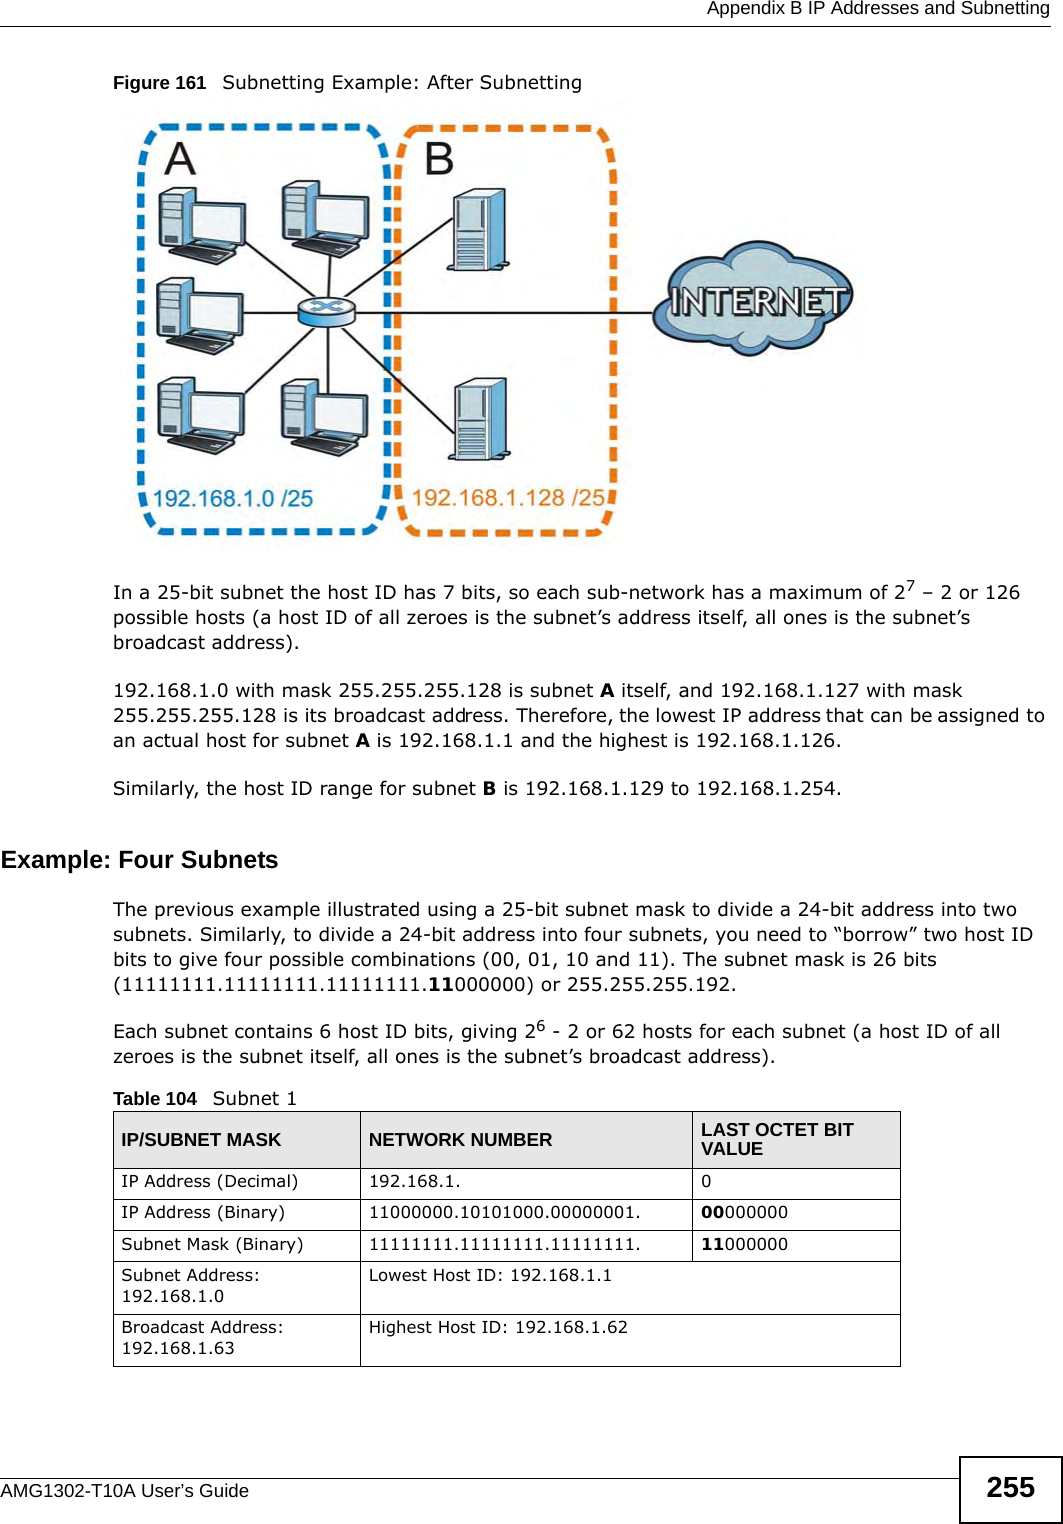  Appendix B IP Addresses and SubnettingAMG1302-T10A User’s Guide 255Figure 161   Subnetting Example: After SubnettingIn a 25-bit subnet the host ID has 7 bits, so each sub-network has a maximum of 27 – 2 or 126 possible hosts (a host ID of all zeroes is the subnet’s address itself, all ones is the subnet’s broadcast address).192.168.1.0 with mask 255.255.255.128 is subnet A itself, and 192.168.1.127 with mask 255.255.255.128 is its broadcast address. Therefore, the lowest IP address that can be assigned to an actual host for subnet A is 192.168.1.1 and the highest is 192.168.1.126. Similarly, the host ID range for subnet B is 192.168.1.129 to 192.168.1.254.Example: Four Subnets The previous example illustrated using a 25-bit subnet mask to divide a 24-bit address into two subnets. Similarly, to divide a 24-bit address into four subnets, you need to “borrow” two host ID bits to give four possible combinations (00, 01, 10 and 11). The subnet mask is 26 bits (11111111.11111111.11111111.11000000) or 255.255.255.192. Each subnet contains 6 host ID bits, giving 26 - 2 or 62 hosts for each subnet (a host ID of all zeroes is the subnet itself, all ones is the subnet’s broadcast address). Table 104   Subnet 1IP/SUBNET MASK NETWORK NUMBER LAST OCTET BIT VALUEIP Address (Decimal) 192.168.1. 0IP Address (Binary) 11000000.10101000.00000001. 00000000Subnet Mask (Binary) 11111111.11111111.11111111. 11000000Subnet Address: 192.168.1.0Lowest Host ID: 192.168.1.1Broadcast Address: 192.168.1.63Highest Host ID: 192.168.1.62